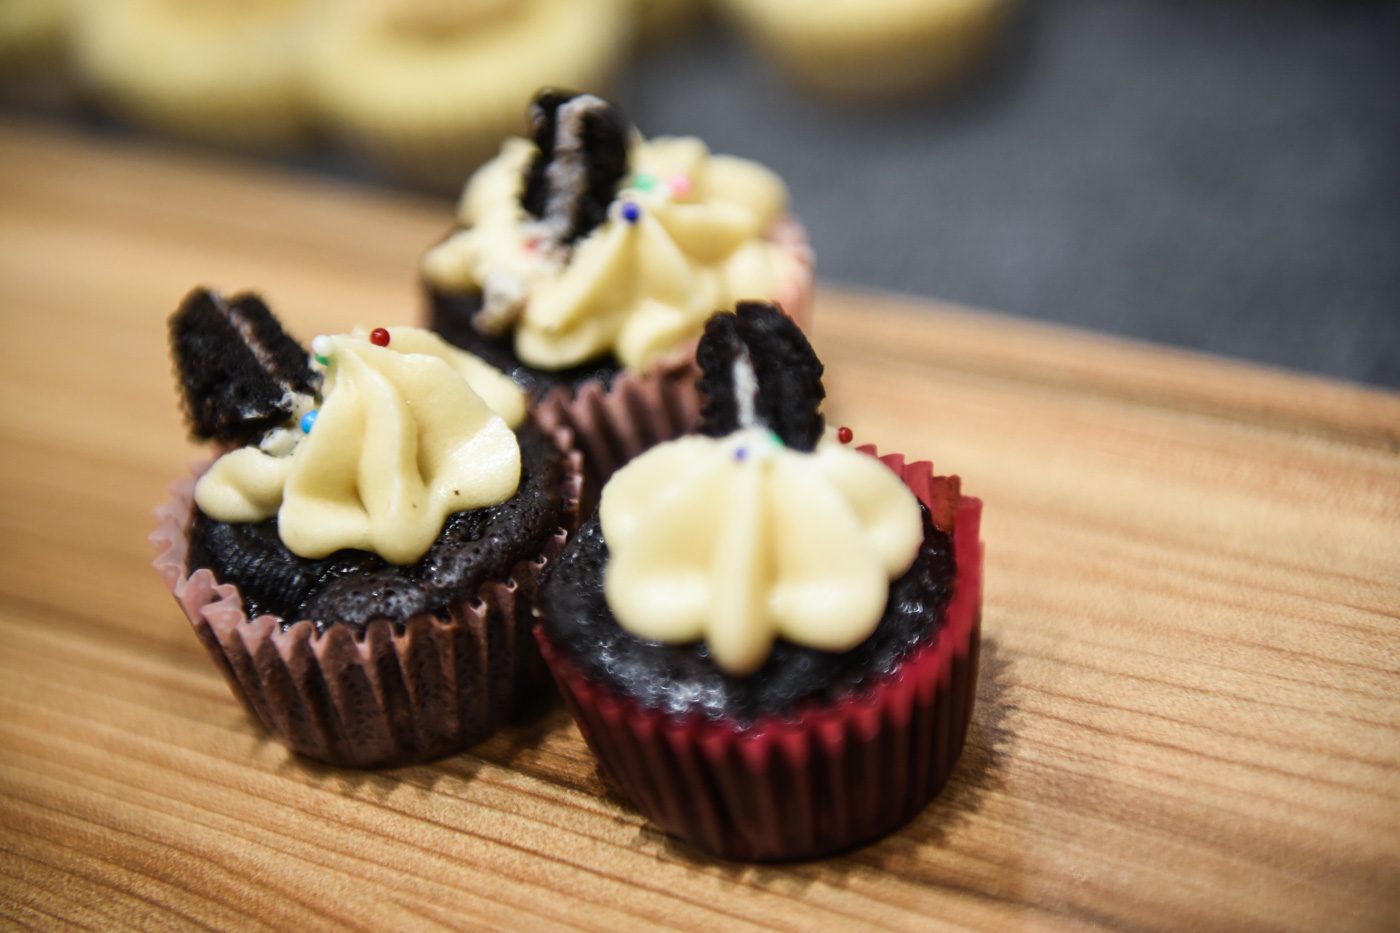 Cupcakes by Edna Bakes. Photo by Alecs Ongcal/Rappler 